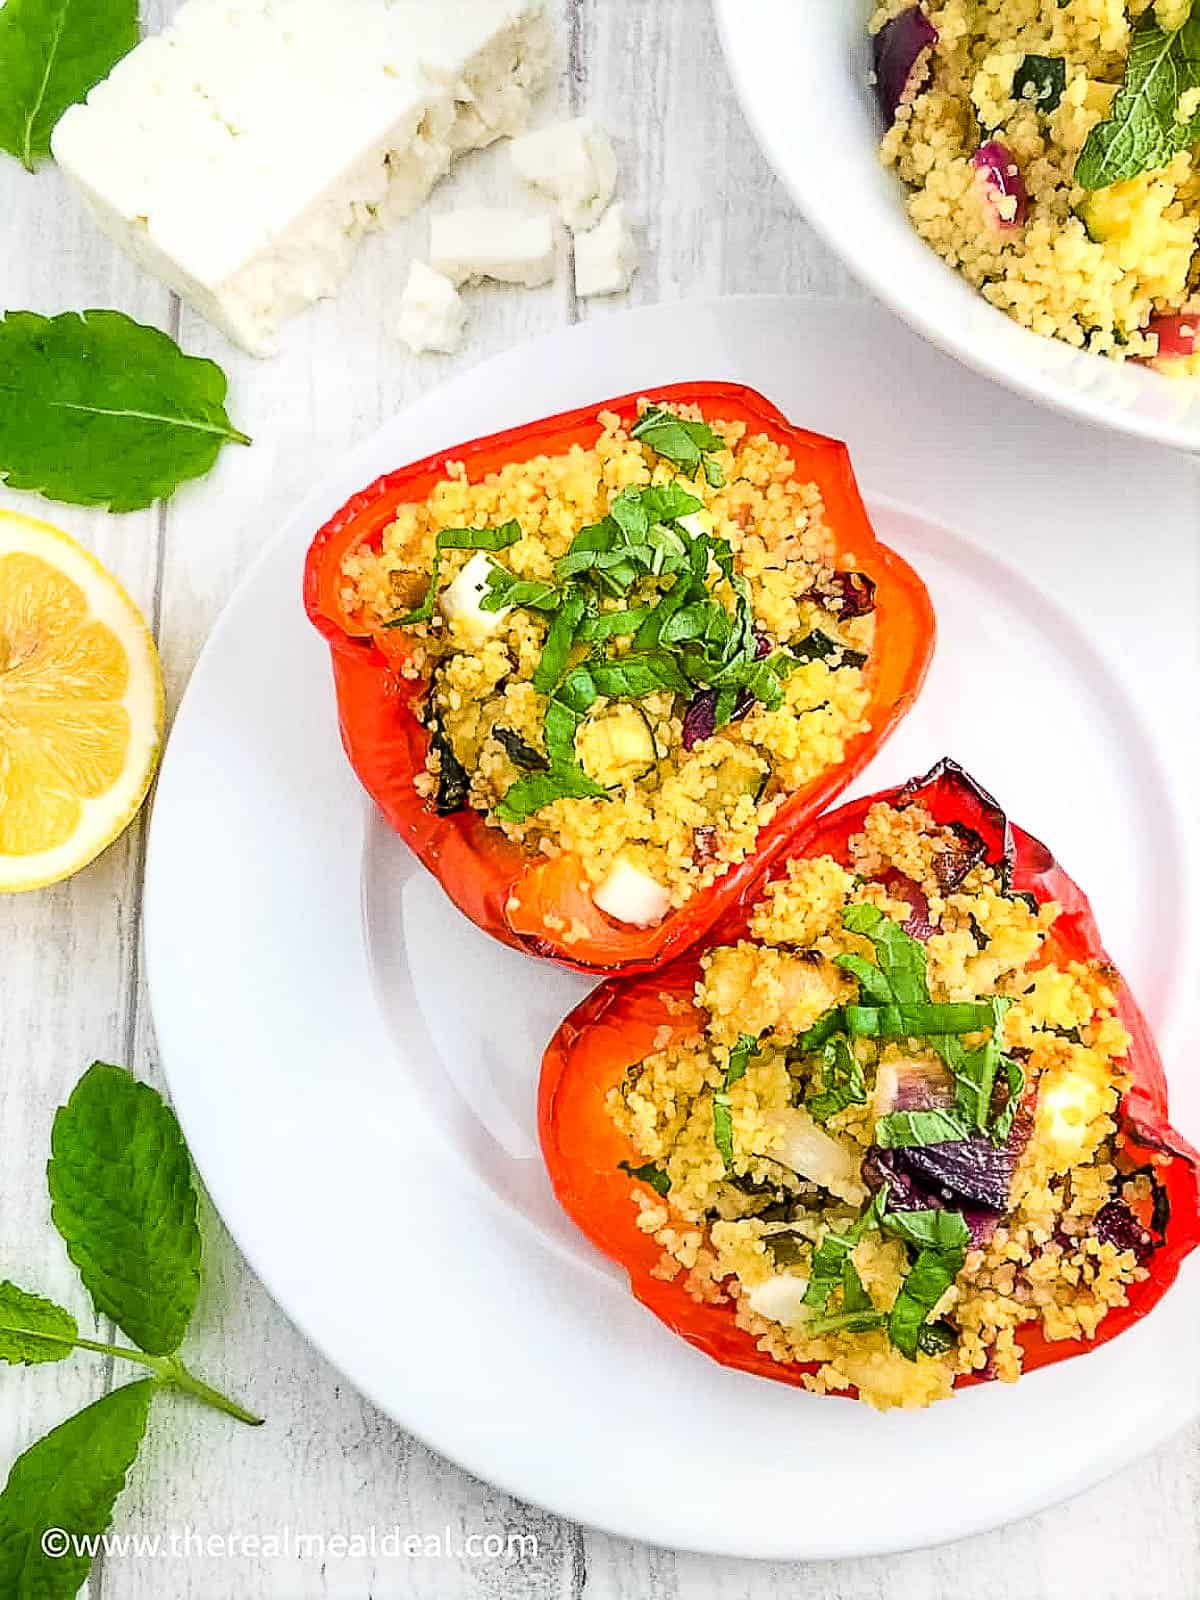 two red pepper halves stuffed with vegetable couscous and feta cheese on plate with lemon, mint and feta cheese to side